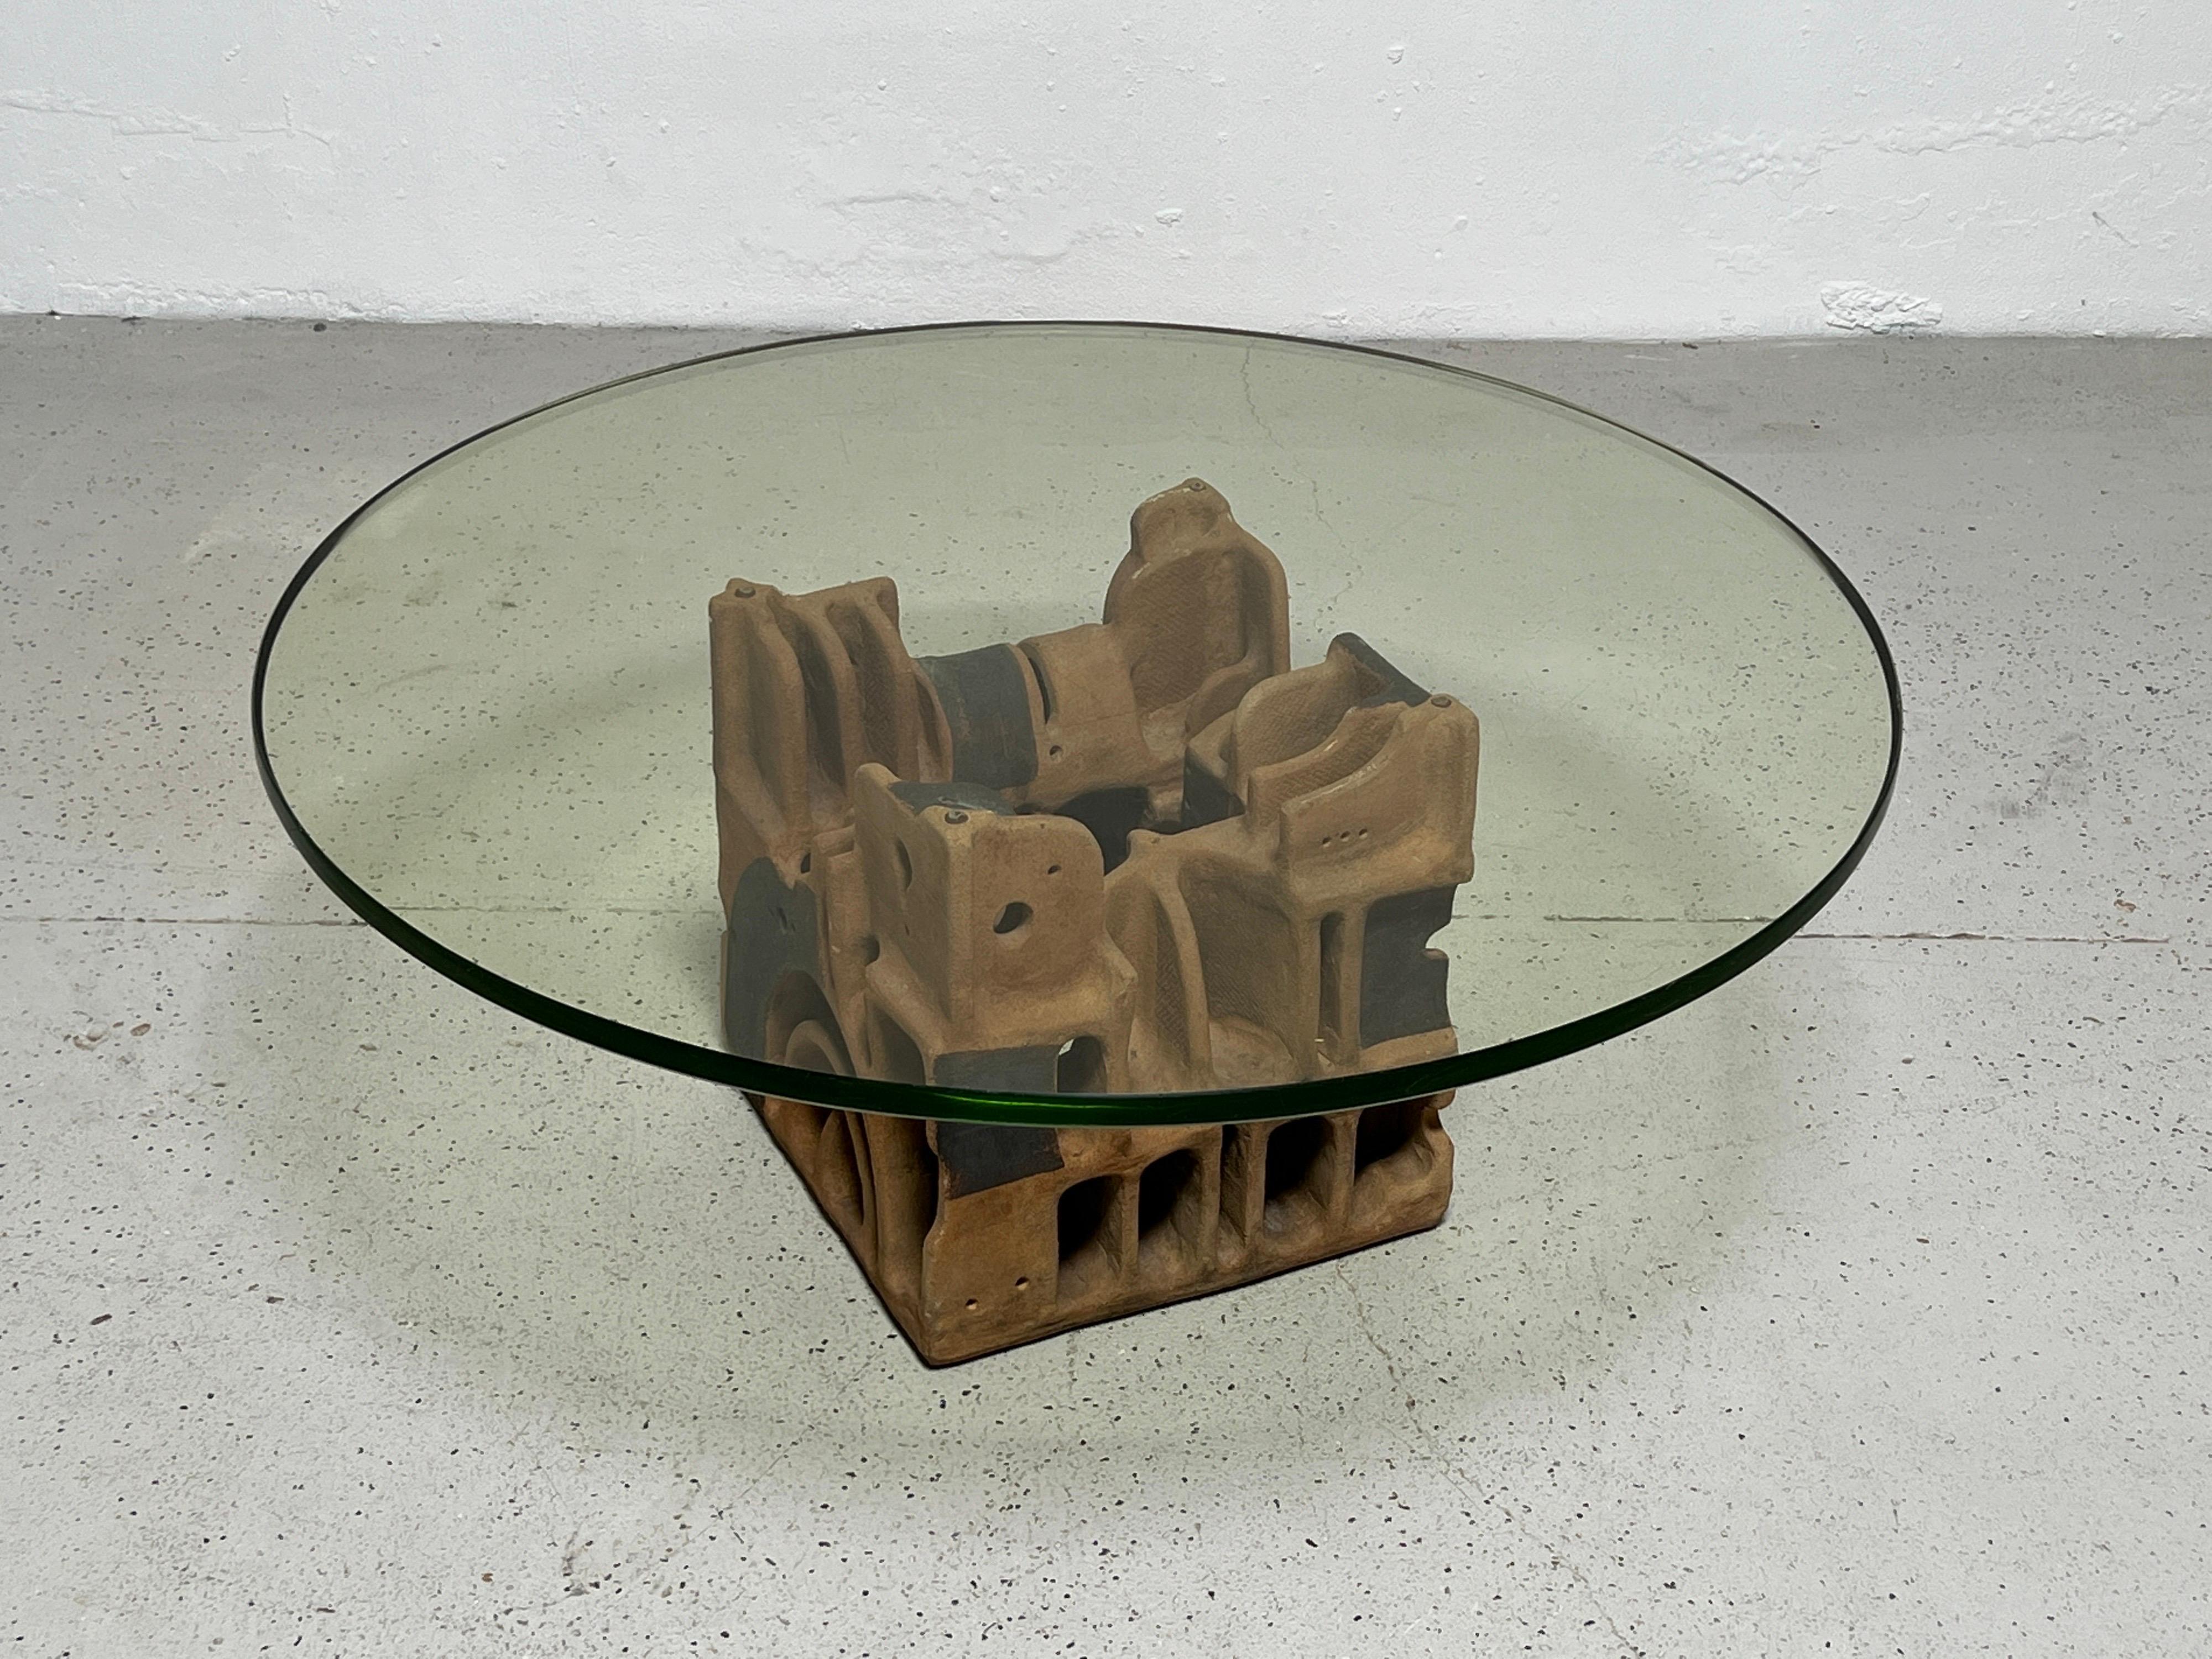 A rare sculptural ceramic table by George Greenamyer commissioned for Vladimir Kagan. Shown with 41.5